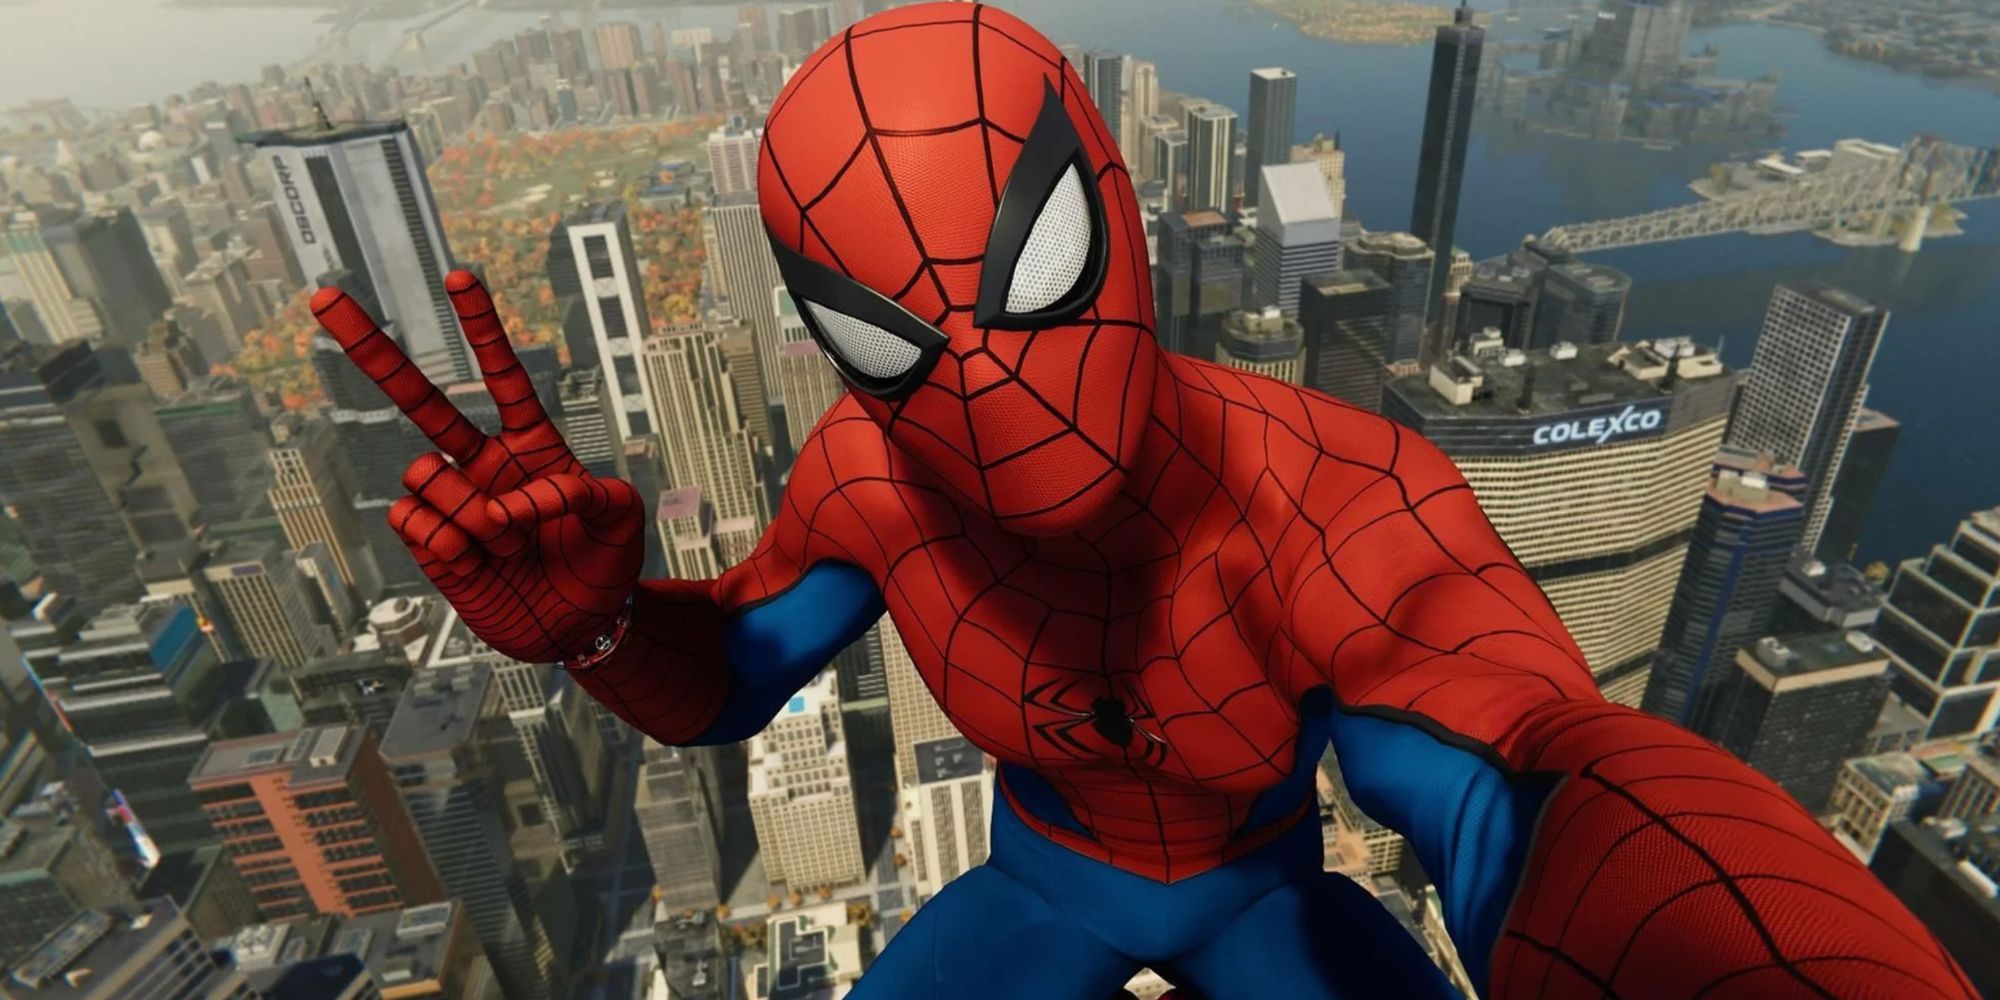 Spider-Man taking a selfie on the top of a building with Central Park in the background in Marvel's Spider-Man